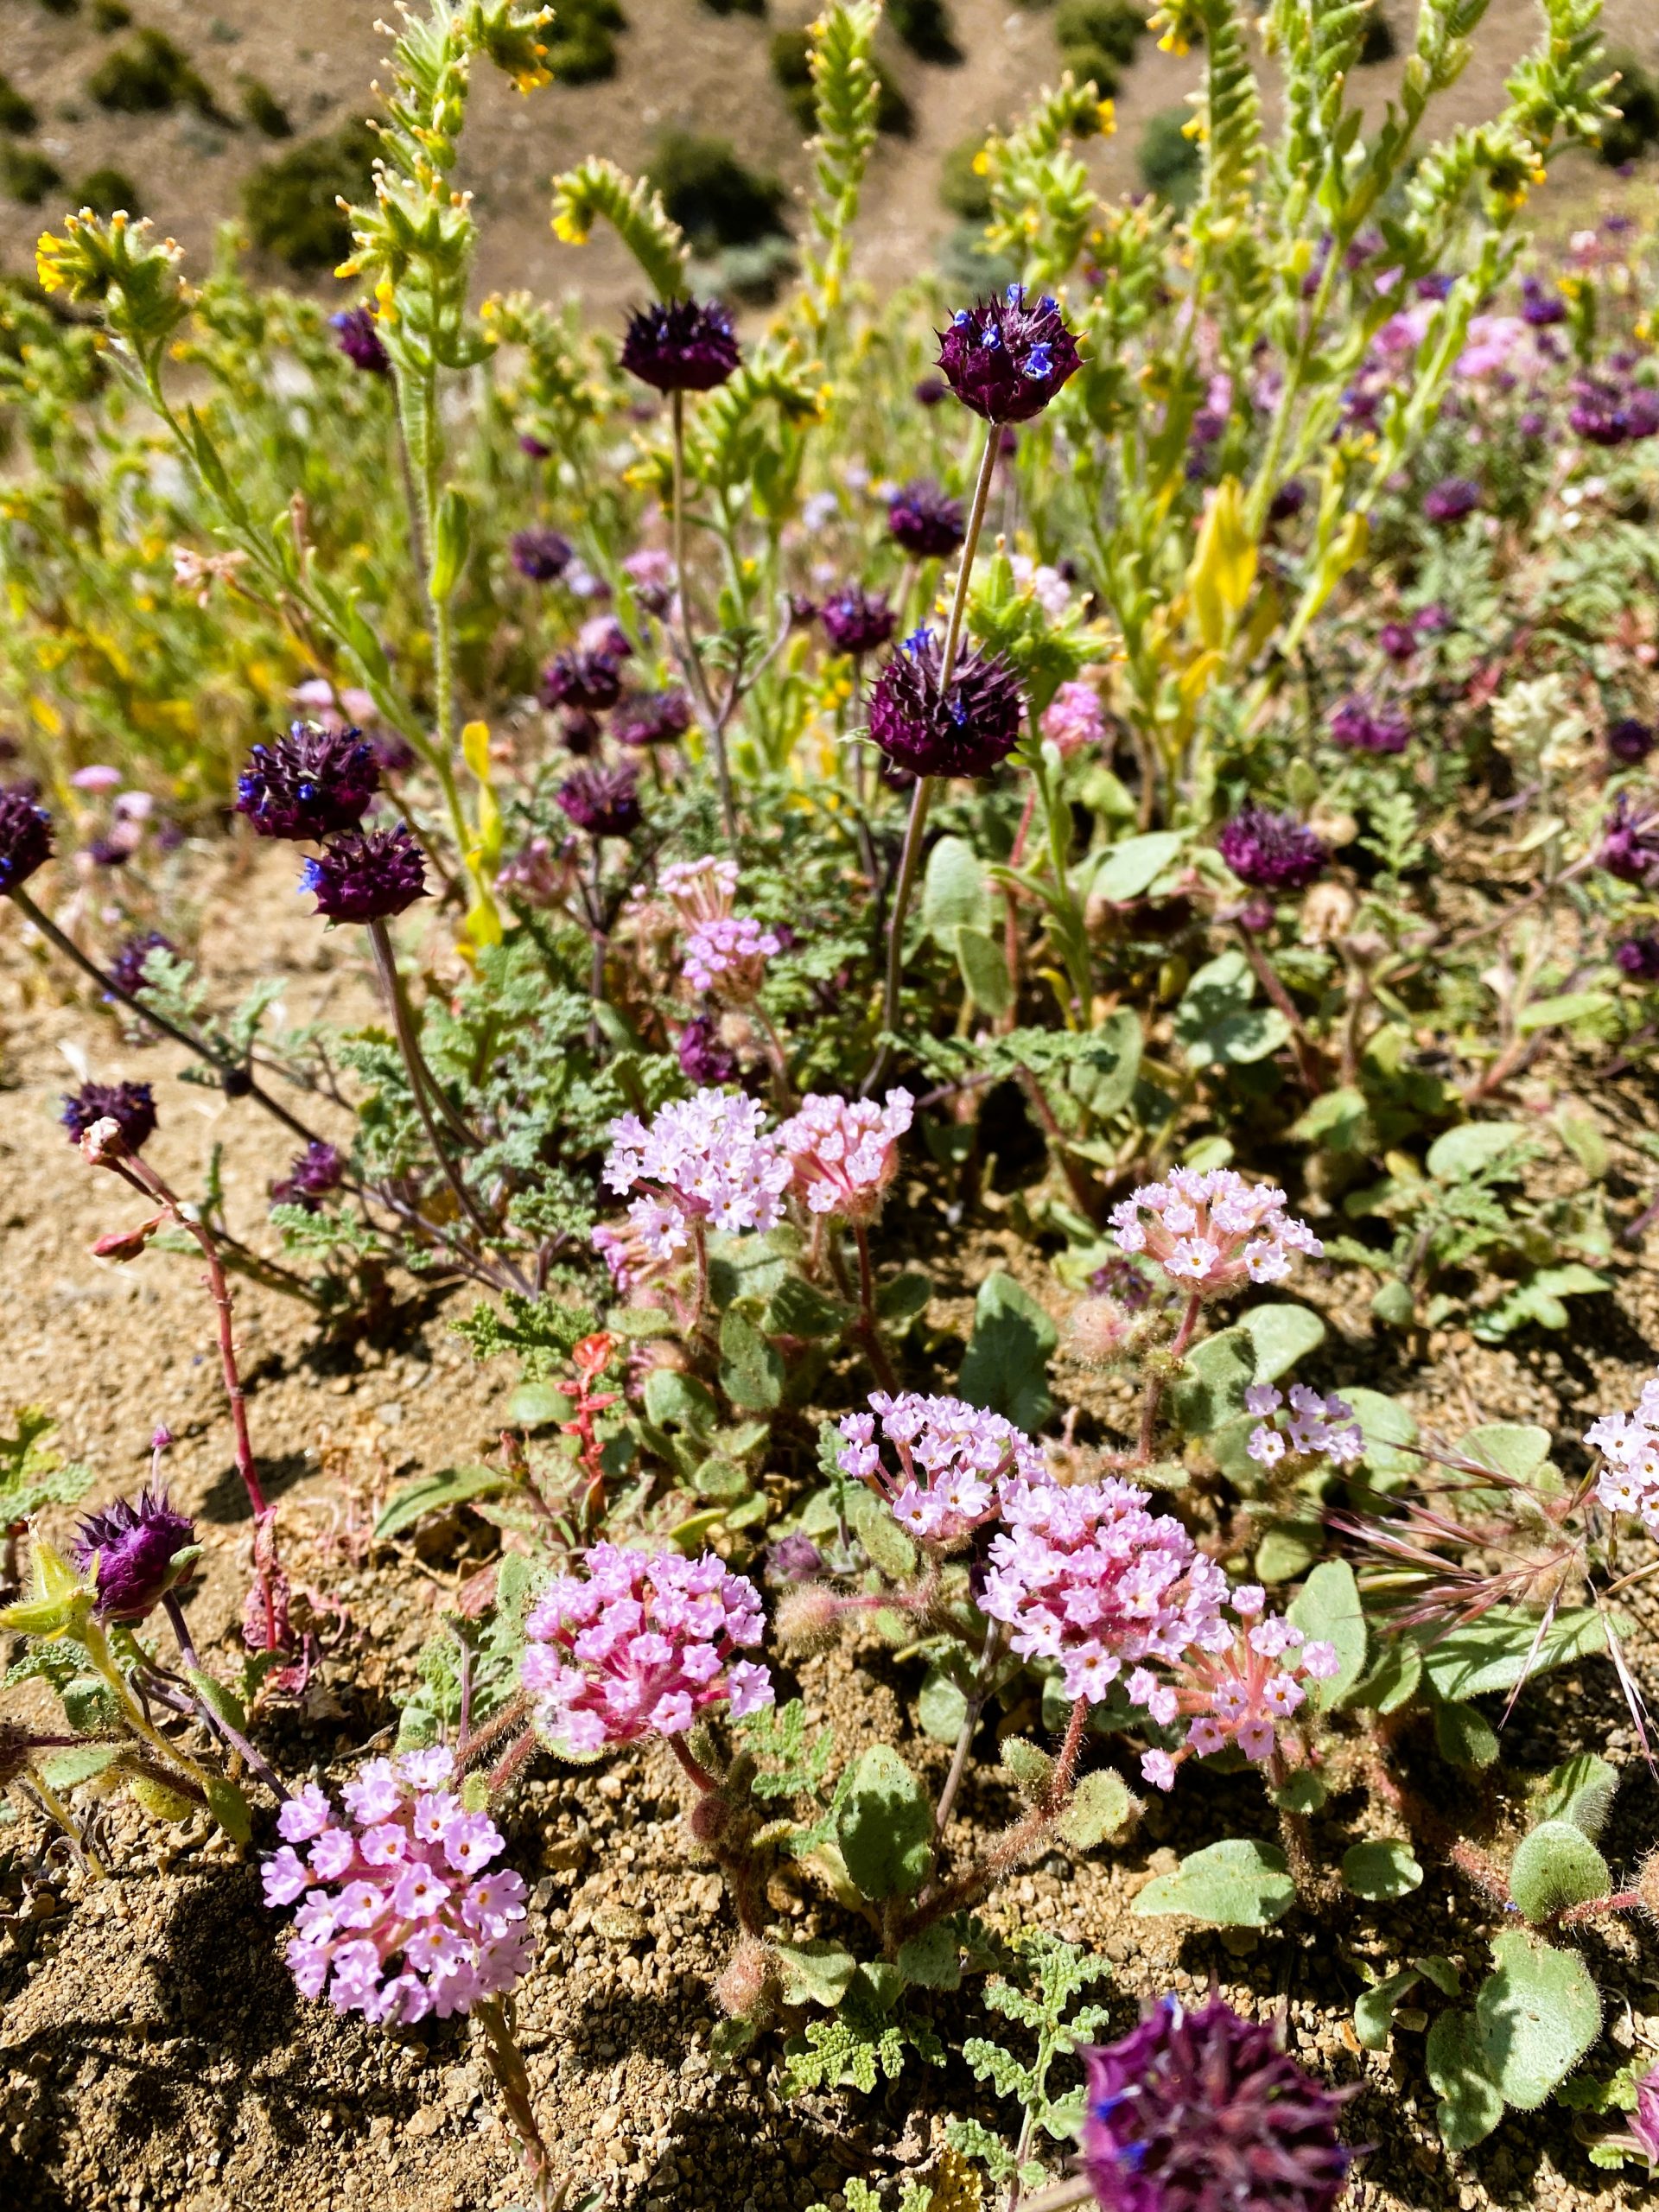 PCT Trail Journal Day 27 Mile 549.0 to 528.0 wildflowers